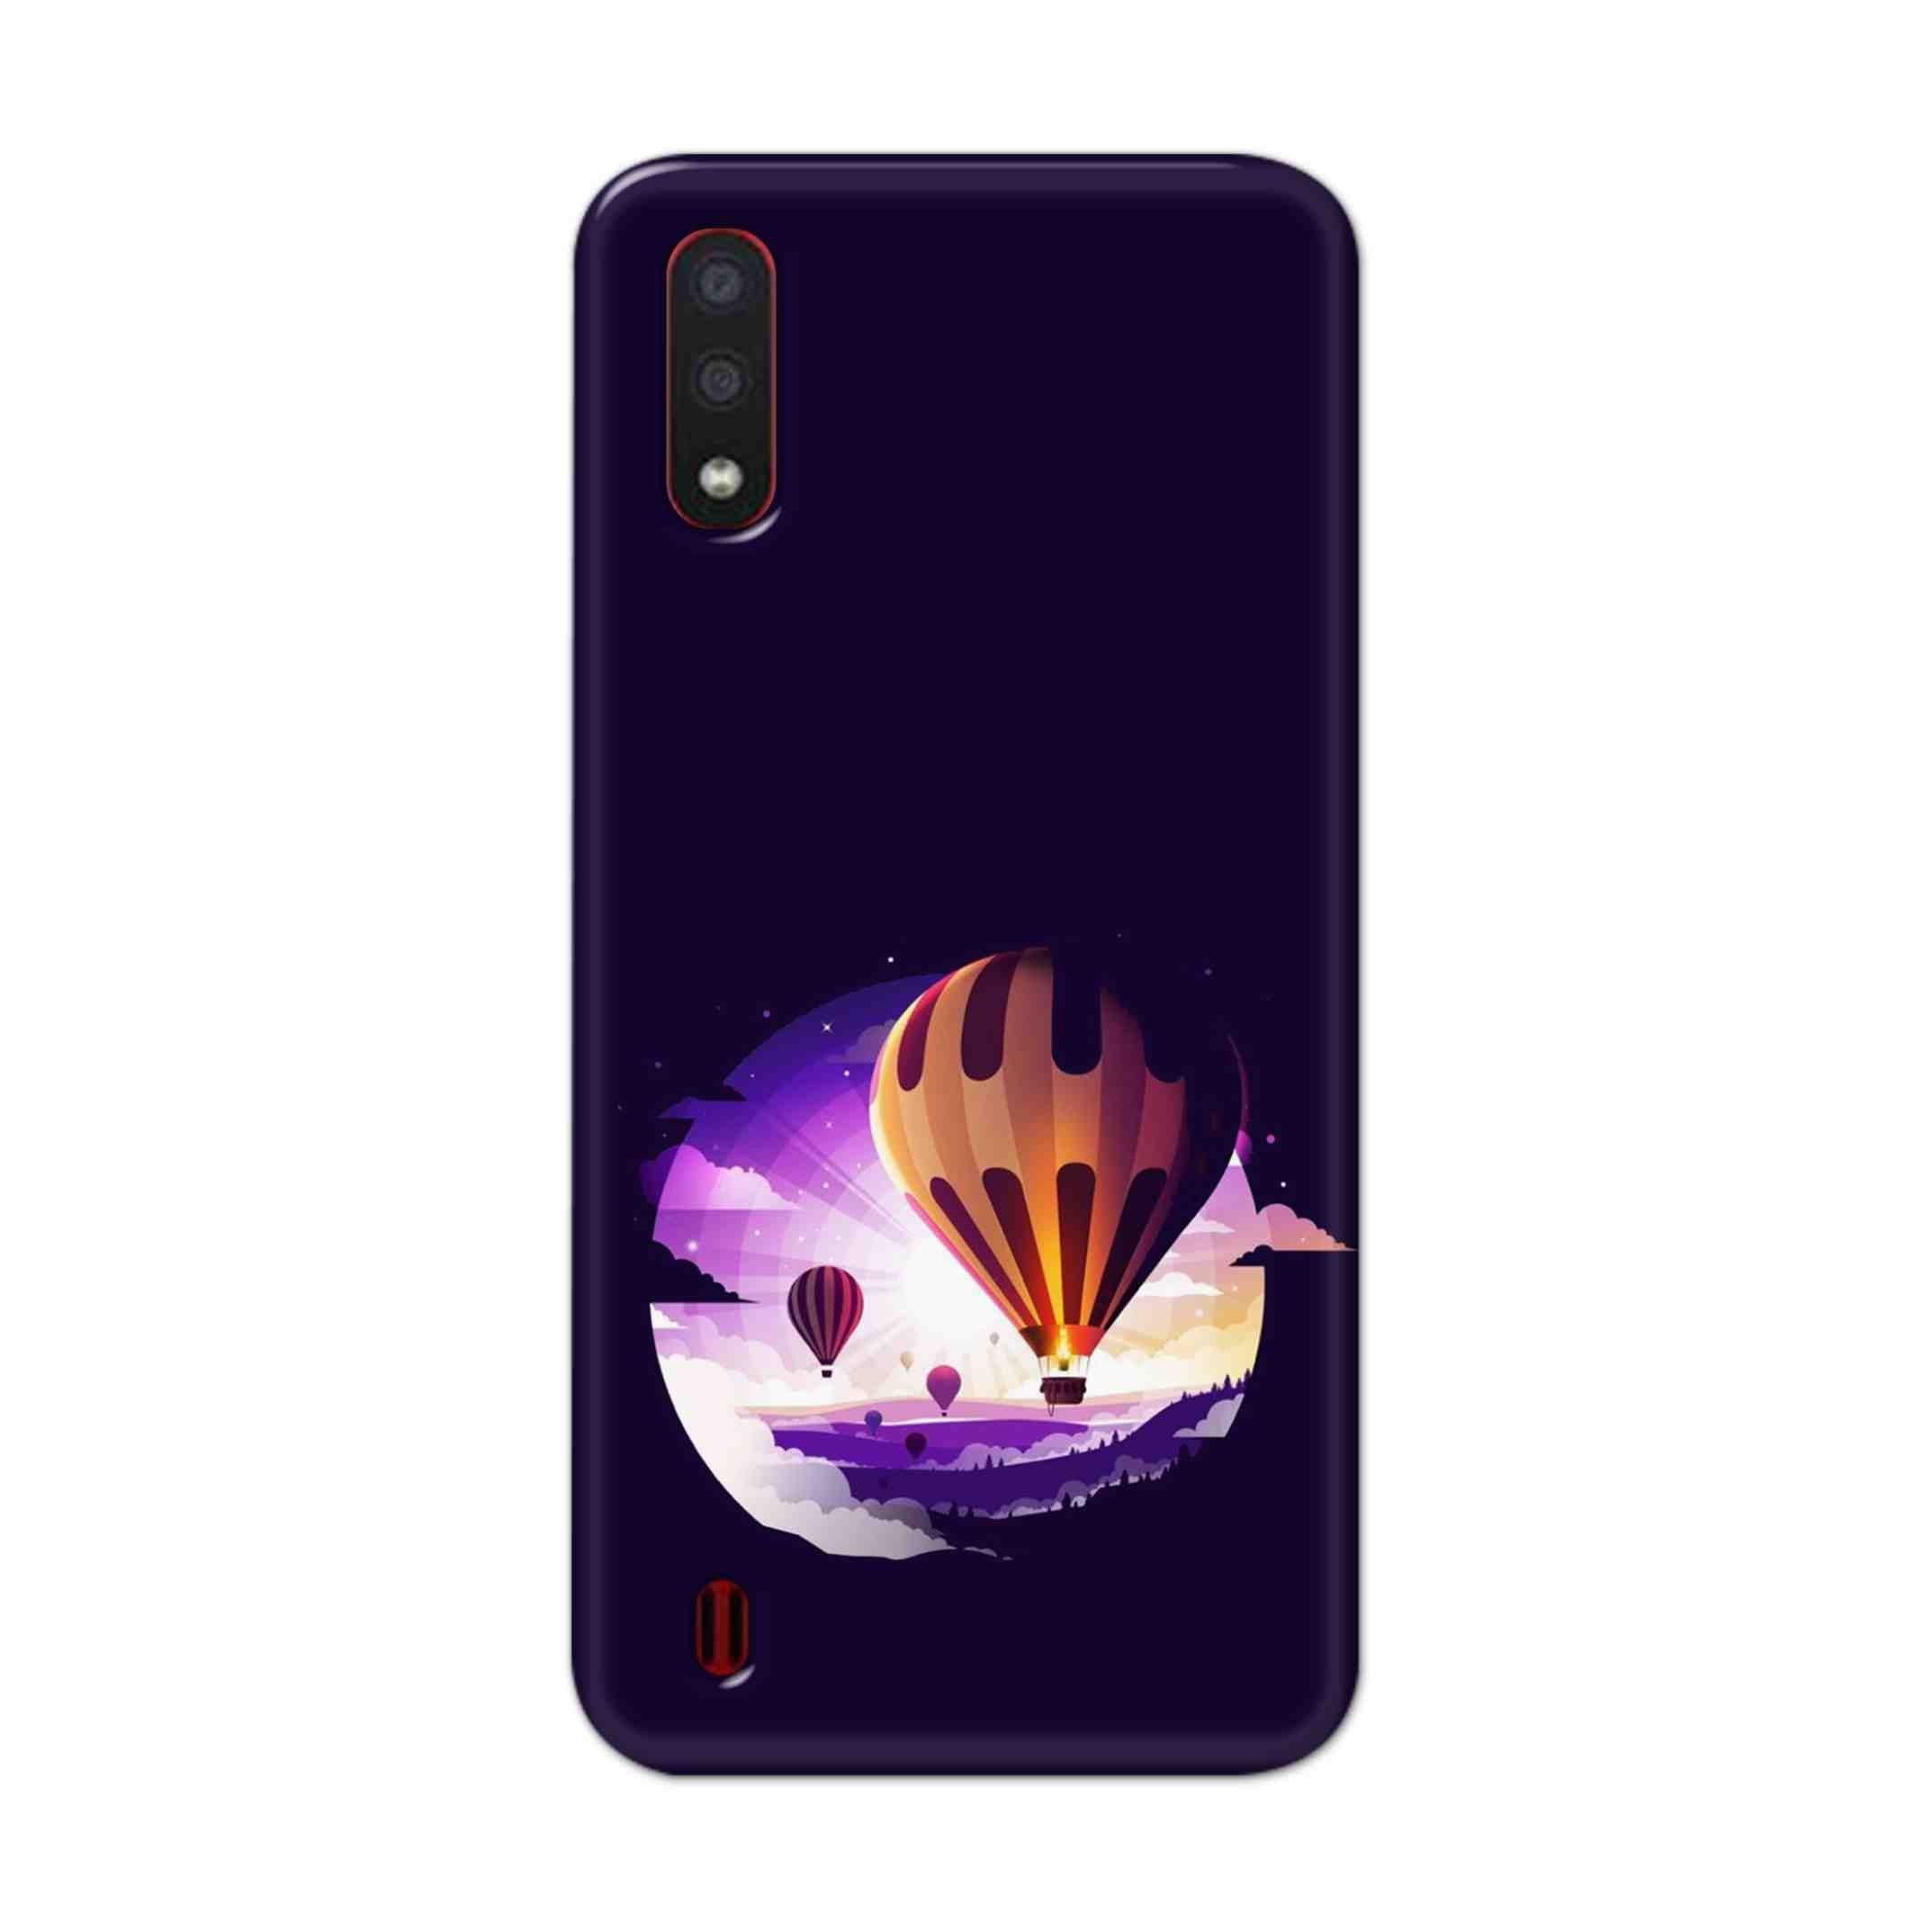 Buy Ballon Hard Back Mobile Phone Case/Cover For Samsung Galaxy M01 Online